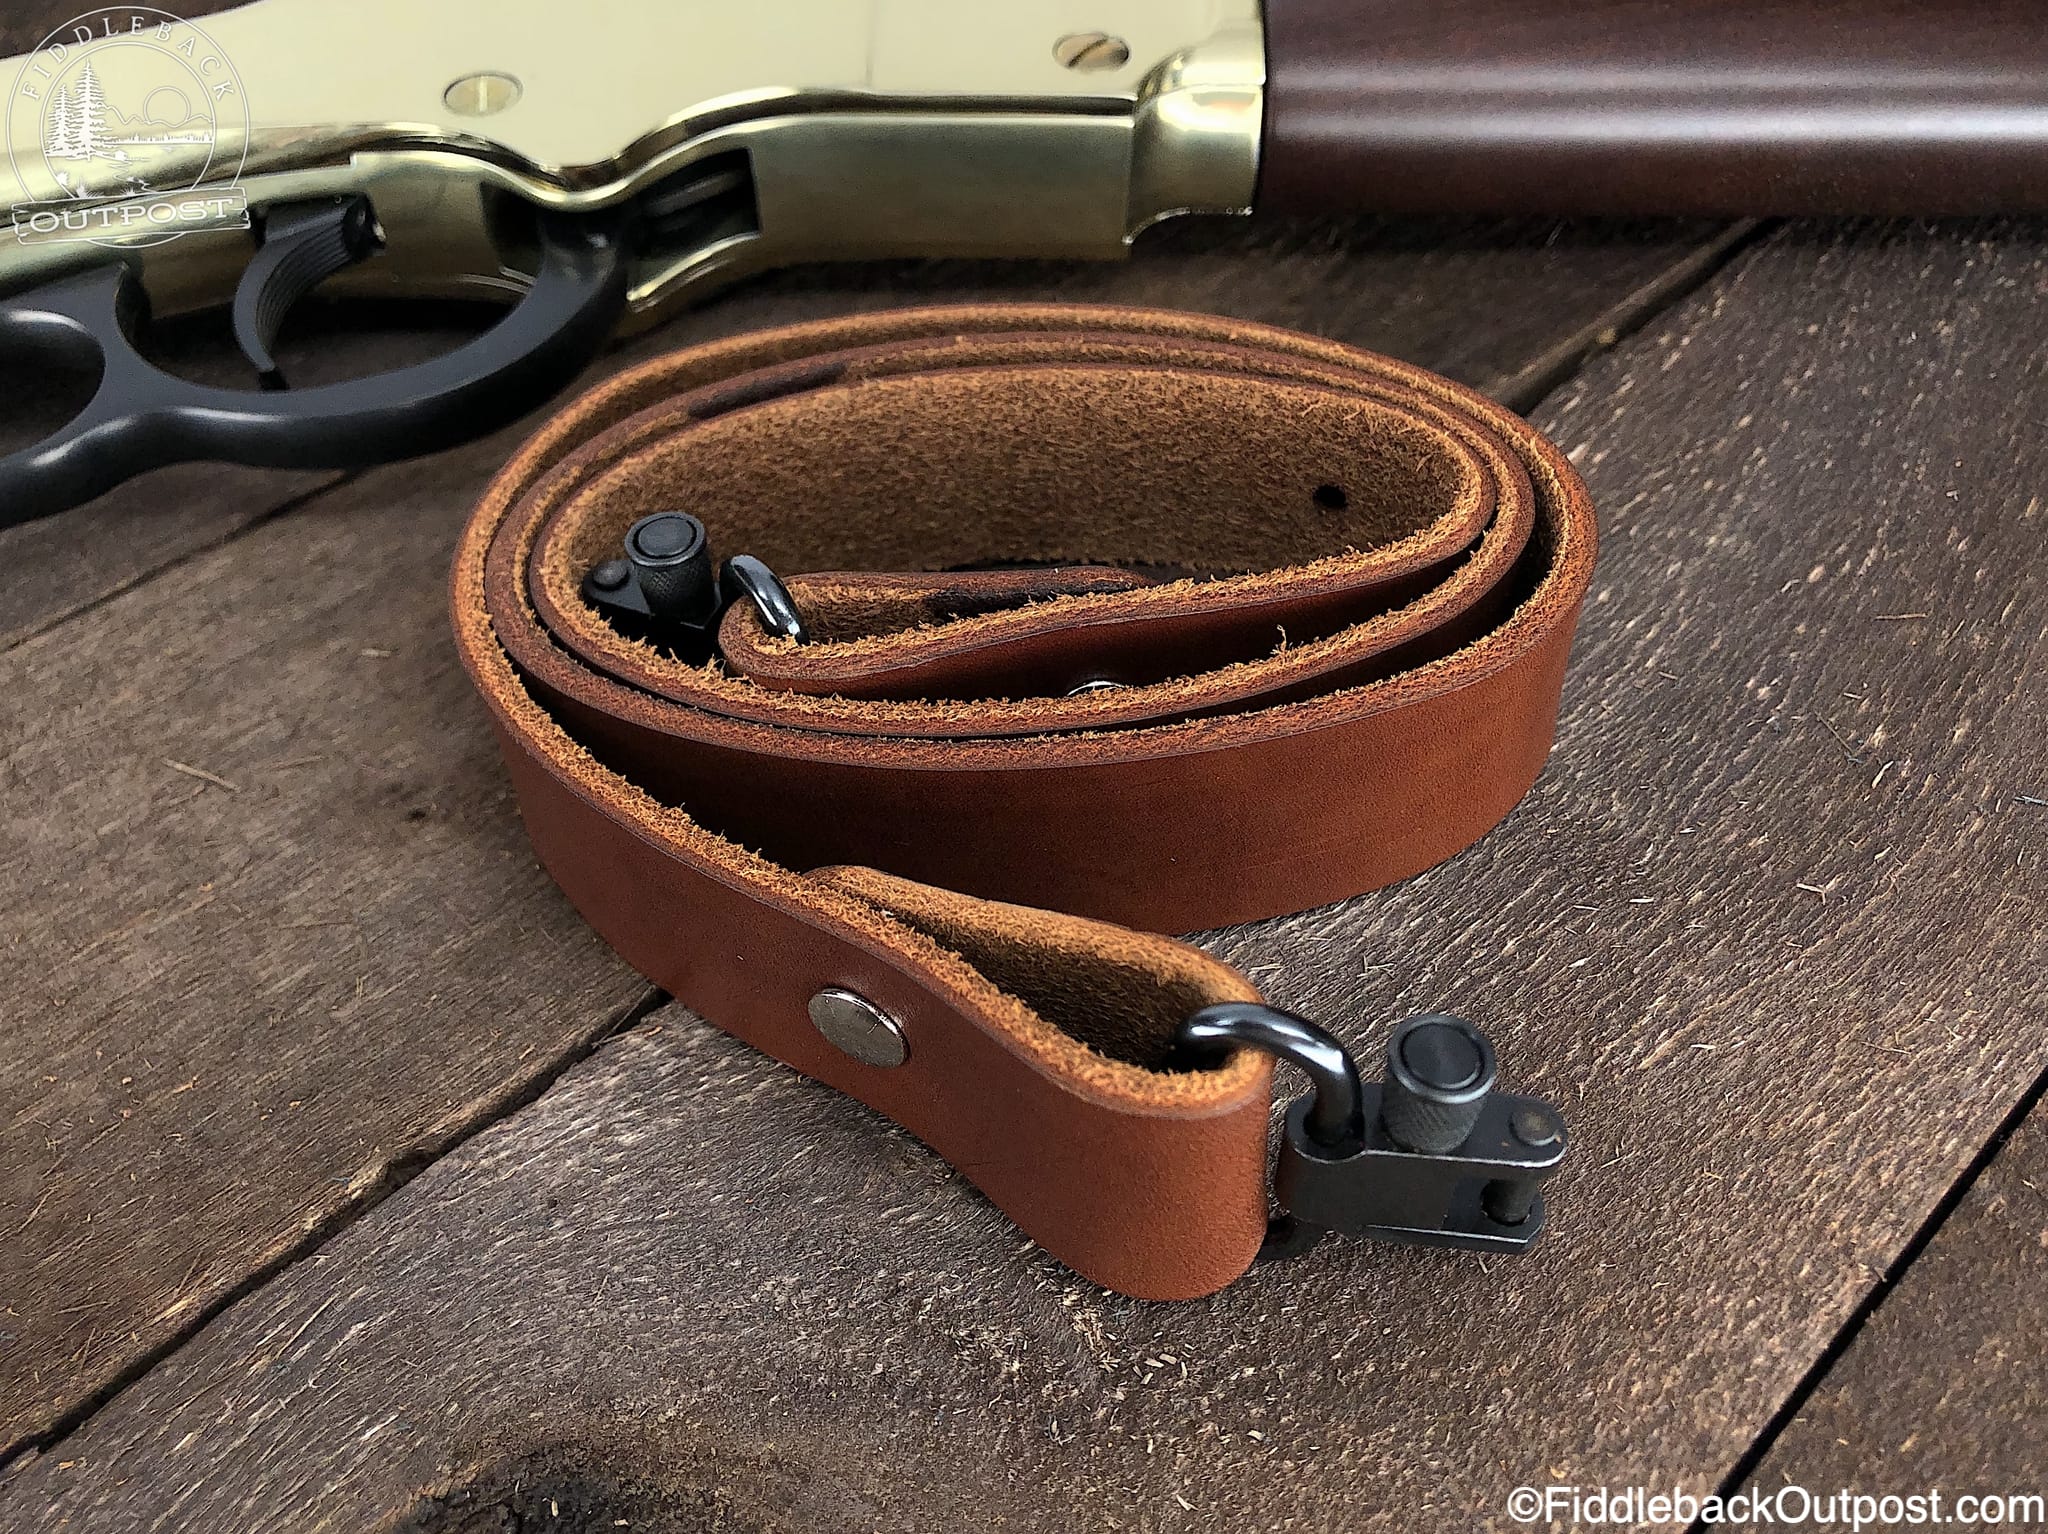 Customize with Our Lever-Action Leather Cover Kit